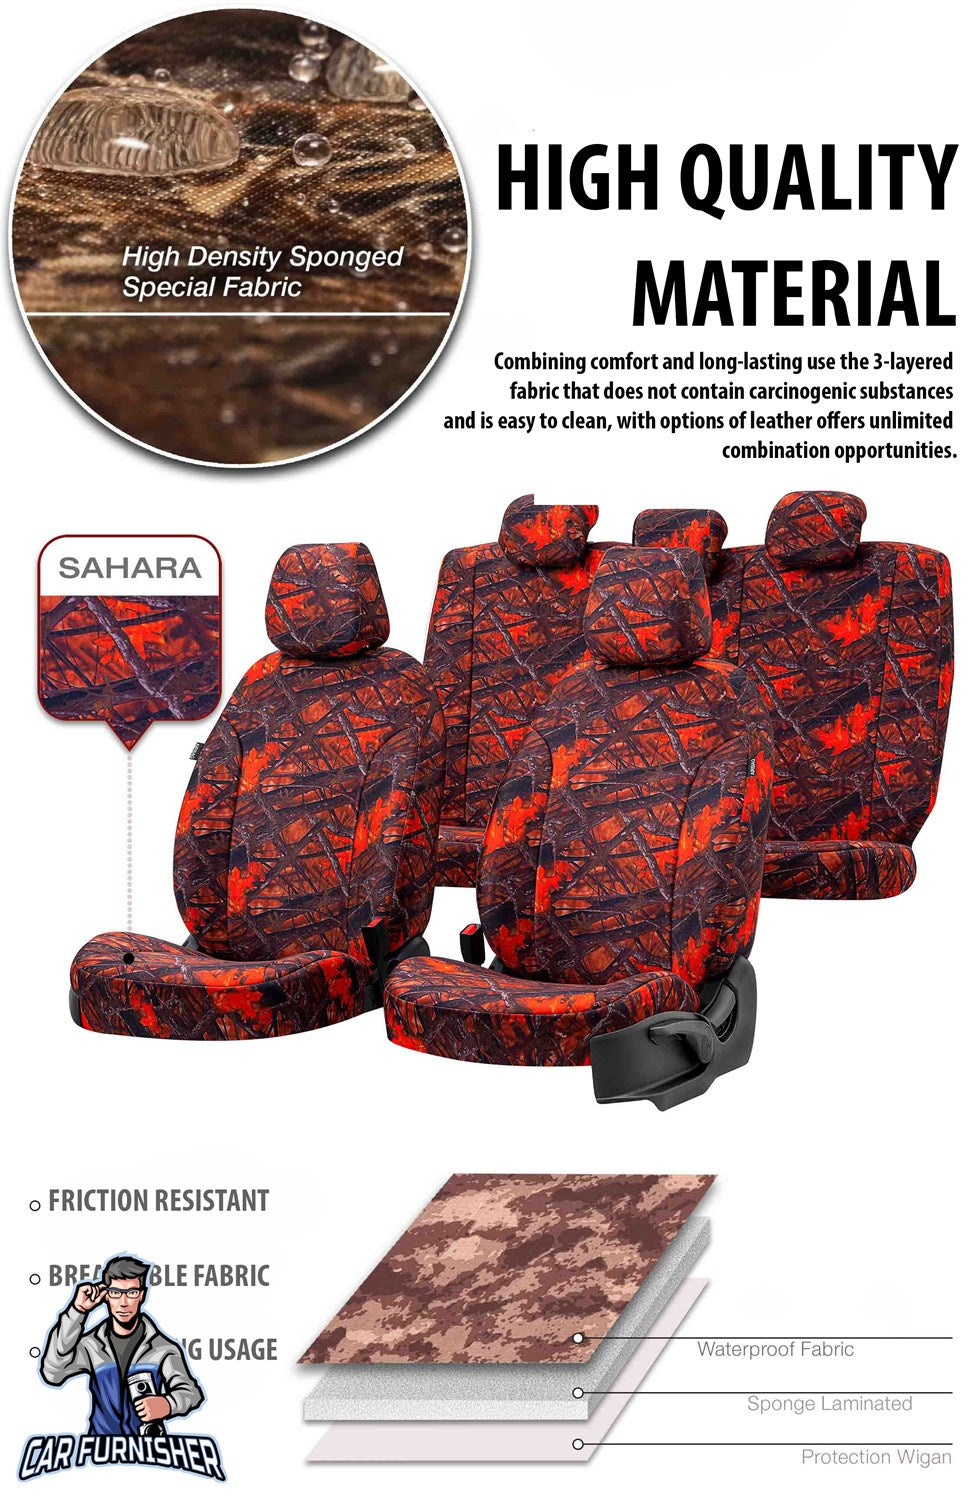 Peugeot 508 Seat Covers Camouflage Waterproof Design Montblanc Camo Waterproof Fabric